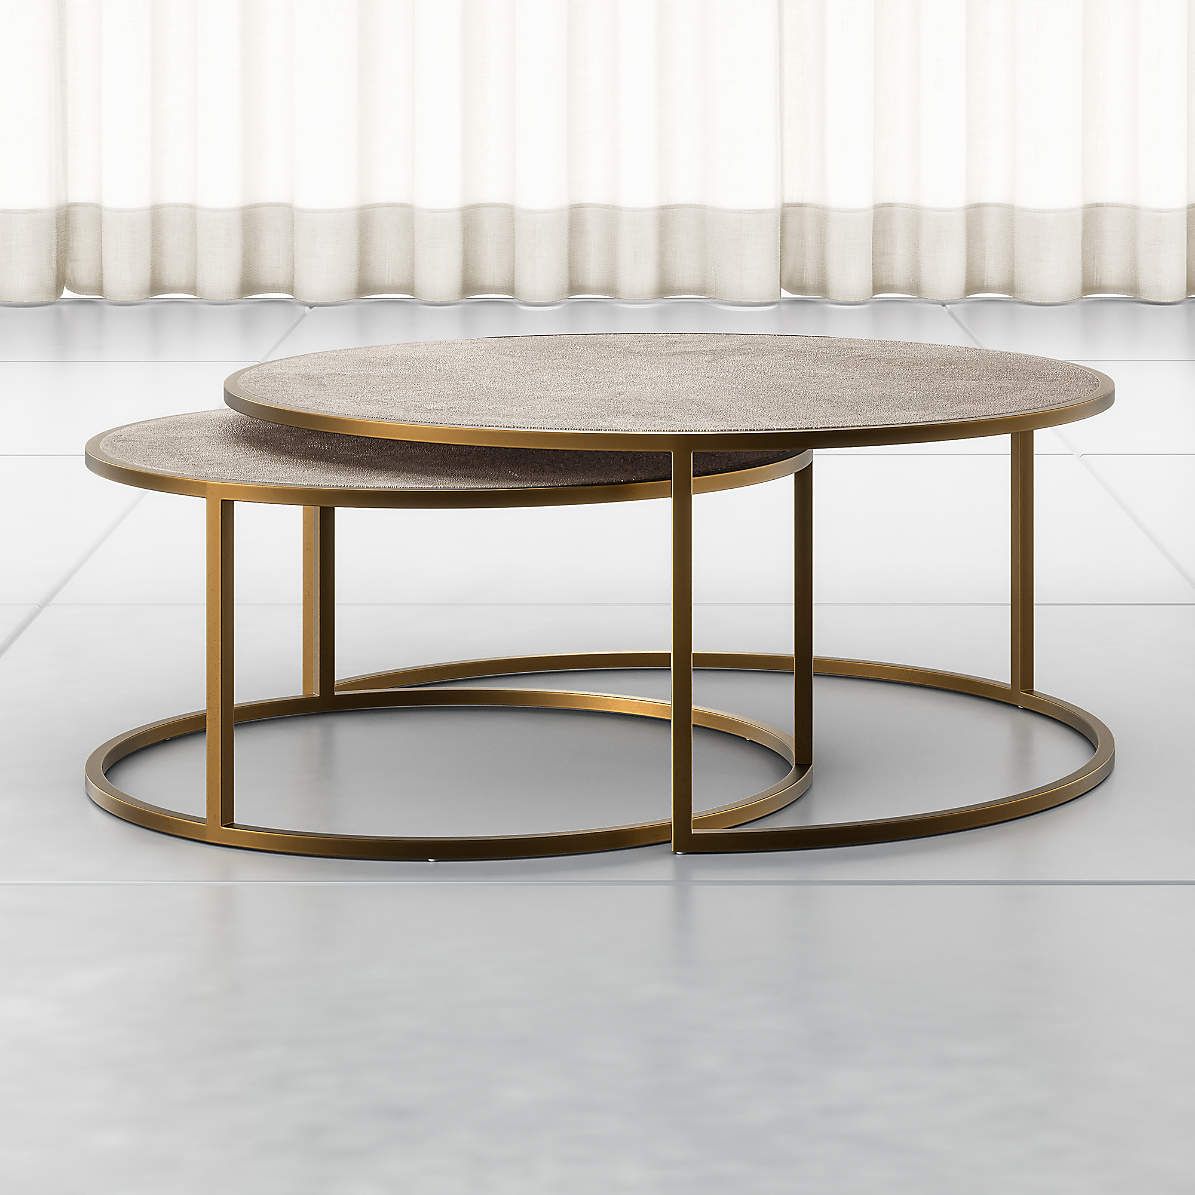 Keya Antique Brass Nesting Coffee Tables + Reviews | Crate & Barrel With Regard To Nesting Coffee Tables (View 7 of 15)